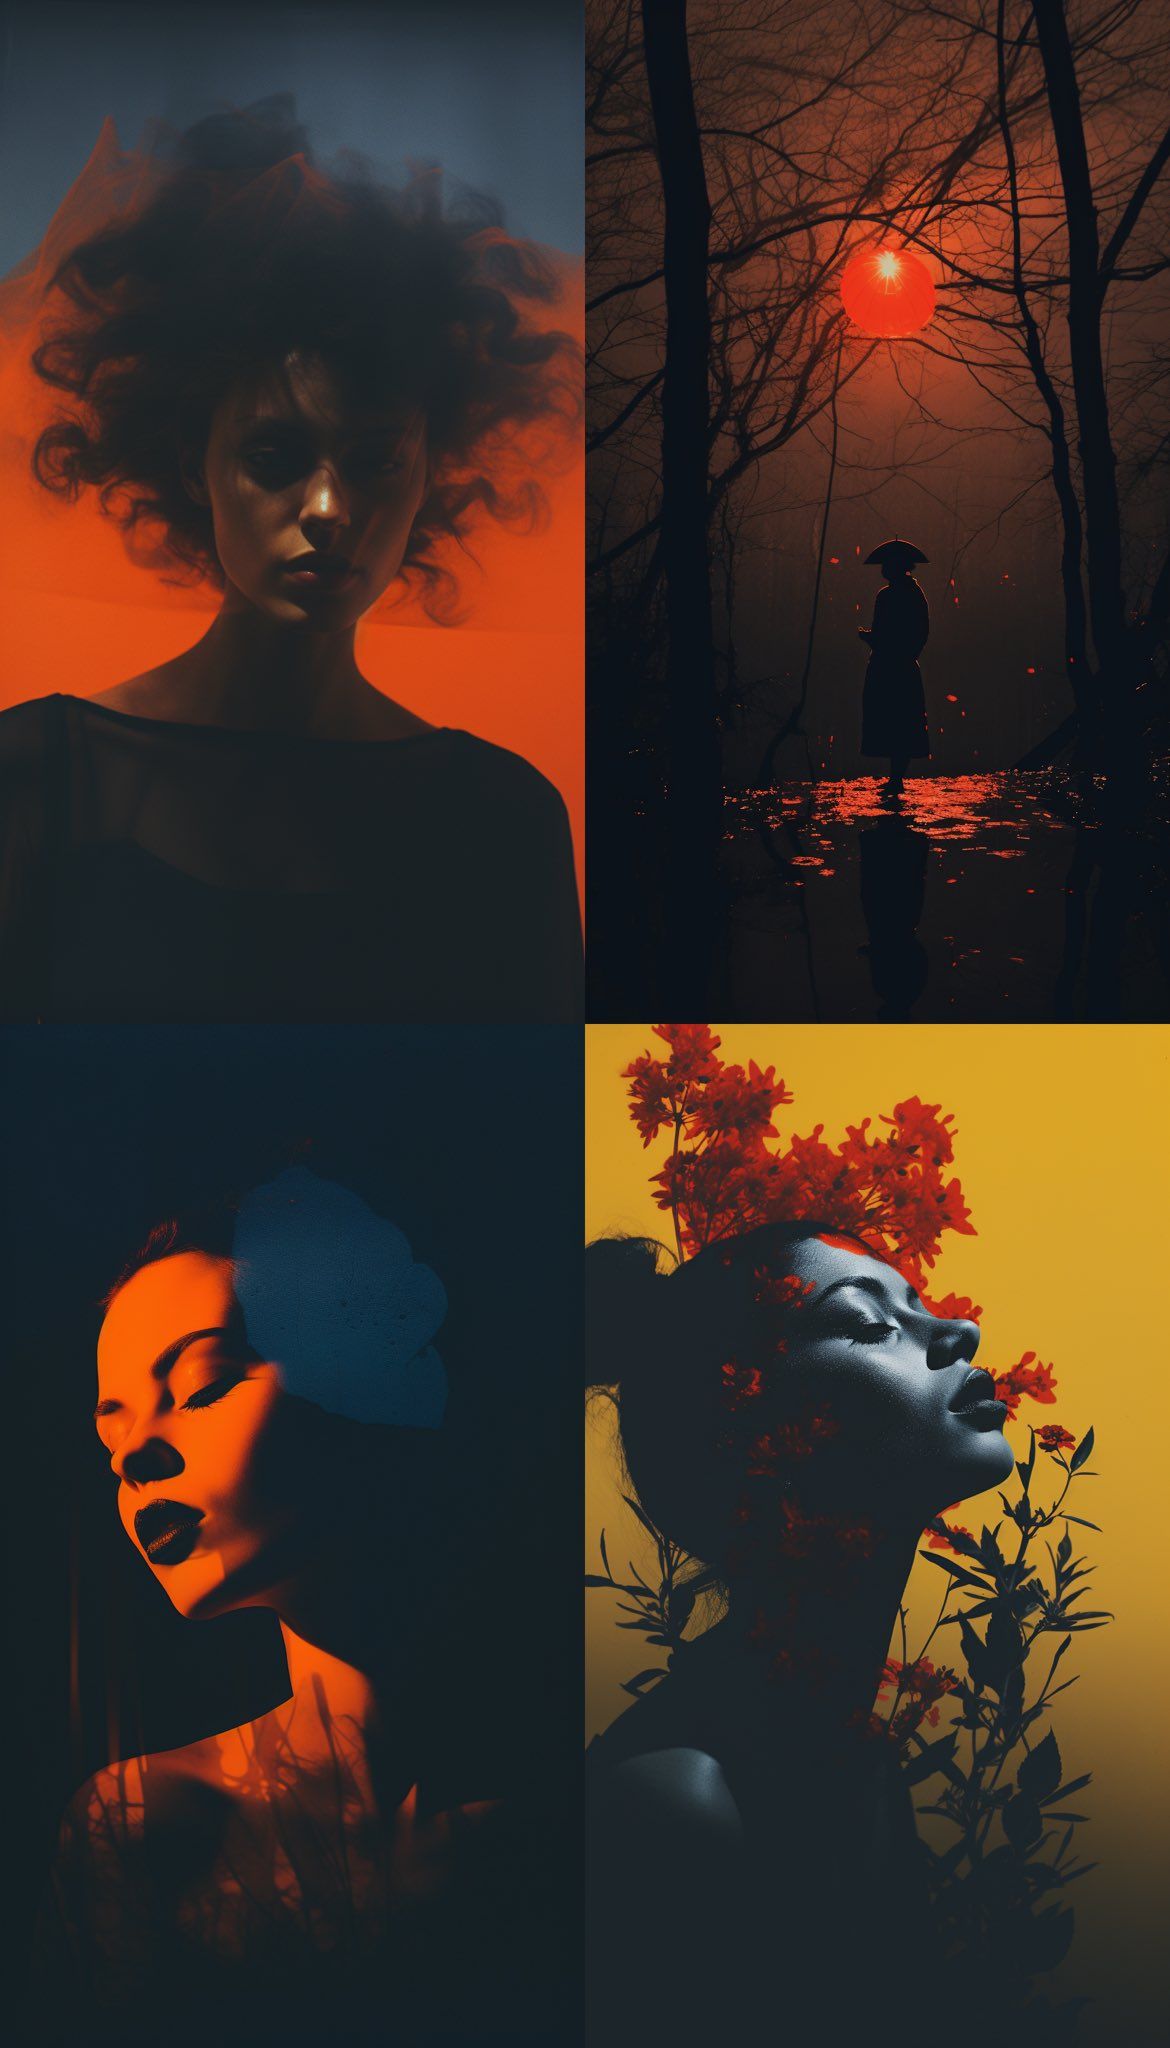 Aesthetic phone wallpaper of a woman with orange and blue colors - Dark orange